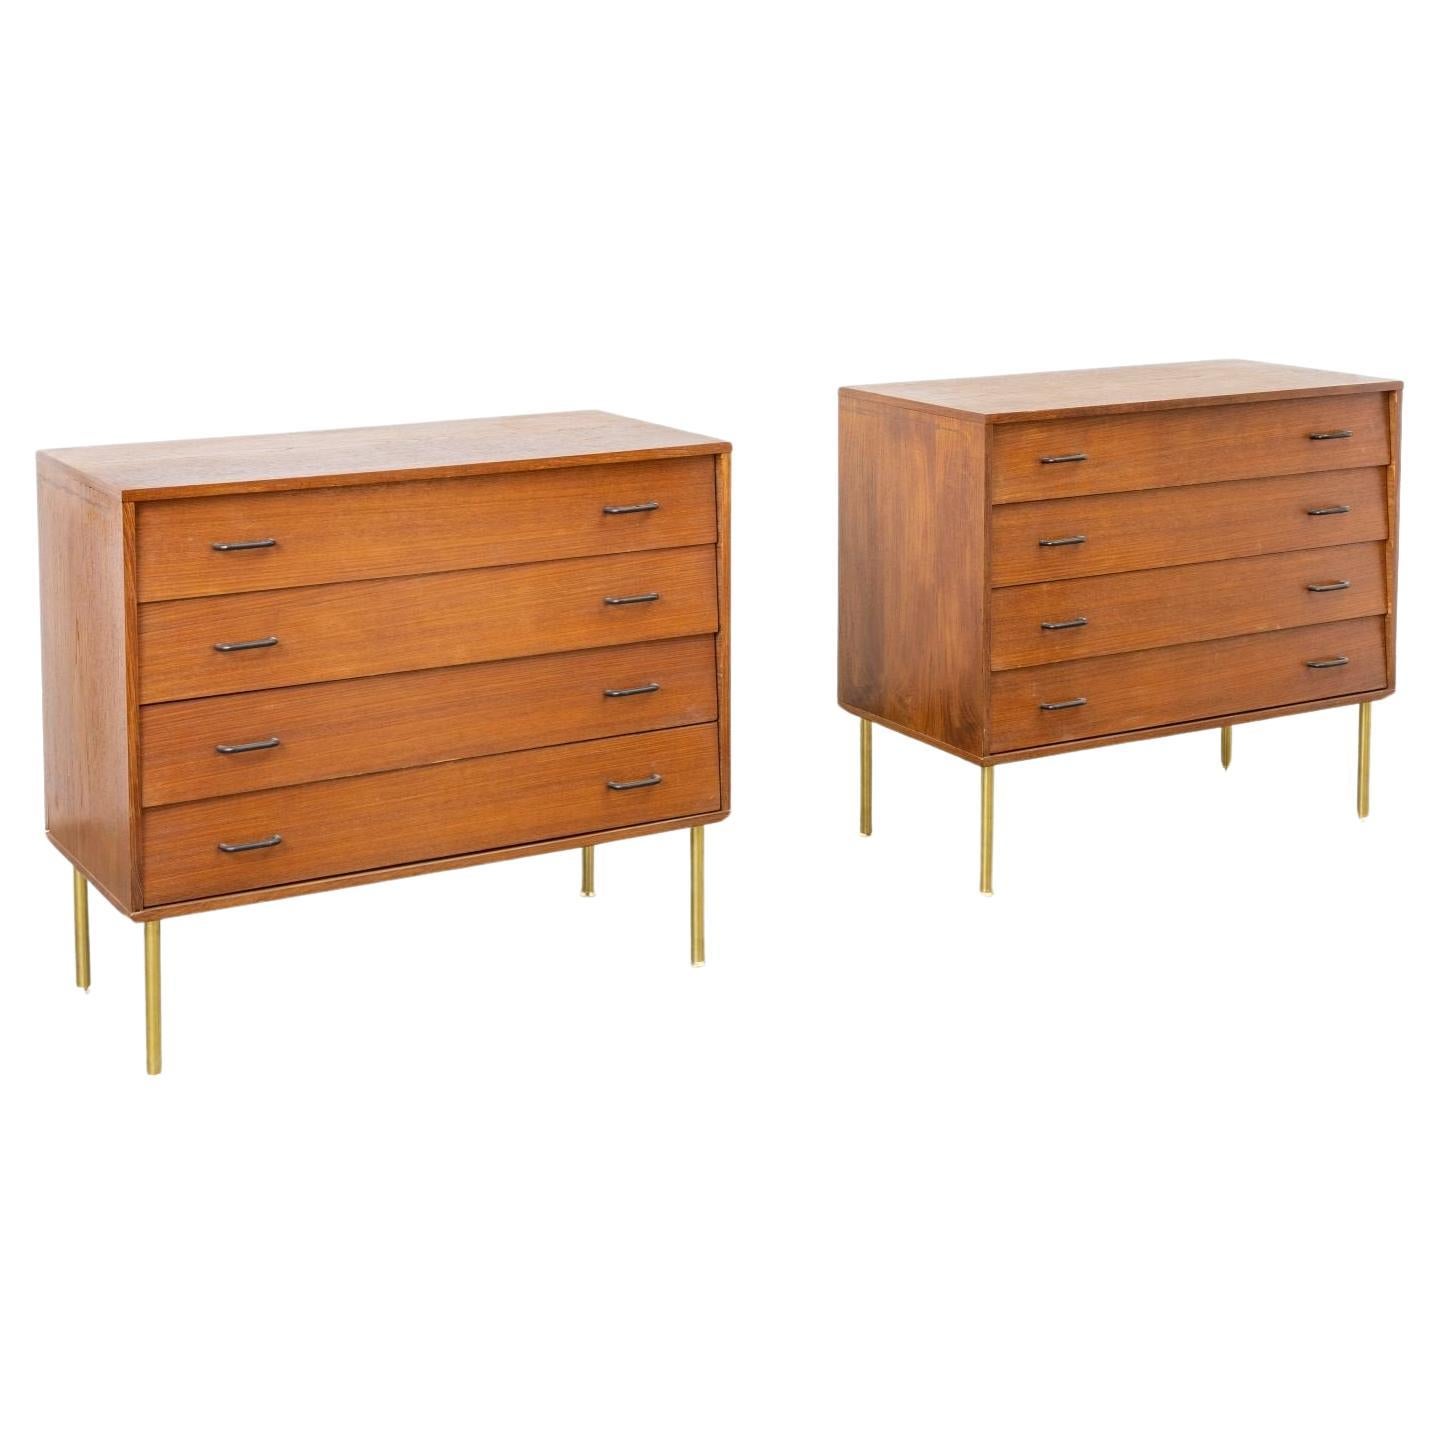 Pair of "Gio Ponti" style chest of drawers manufactured by Isa Bergamo, 1950s For Sale